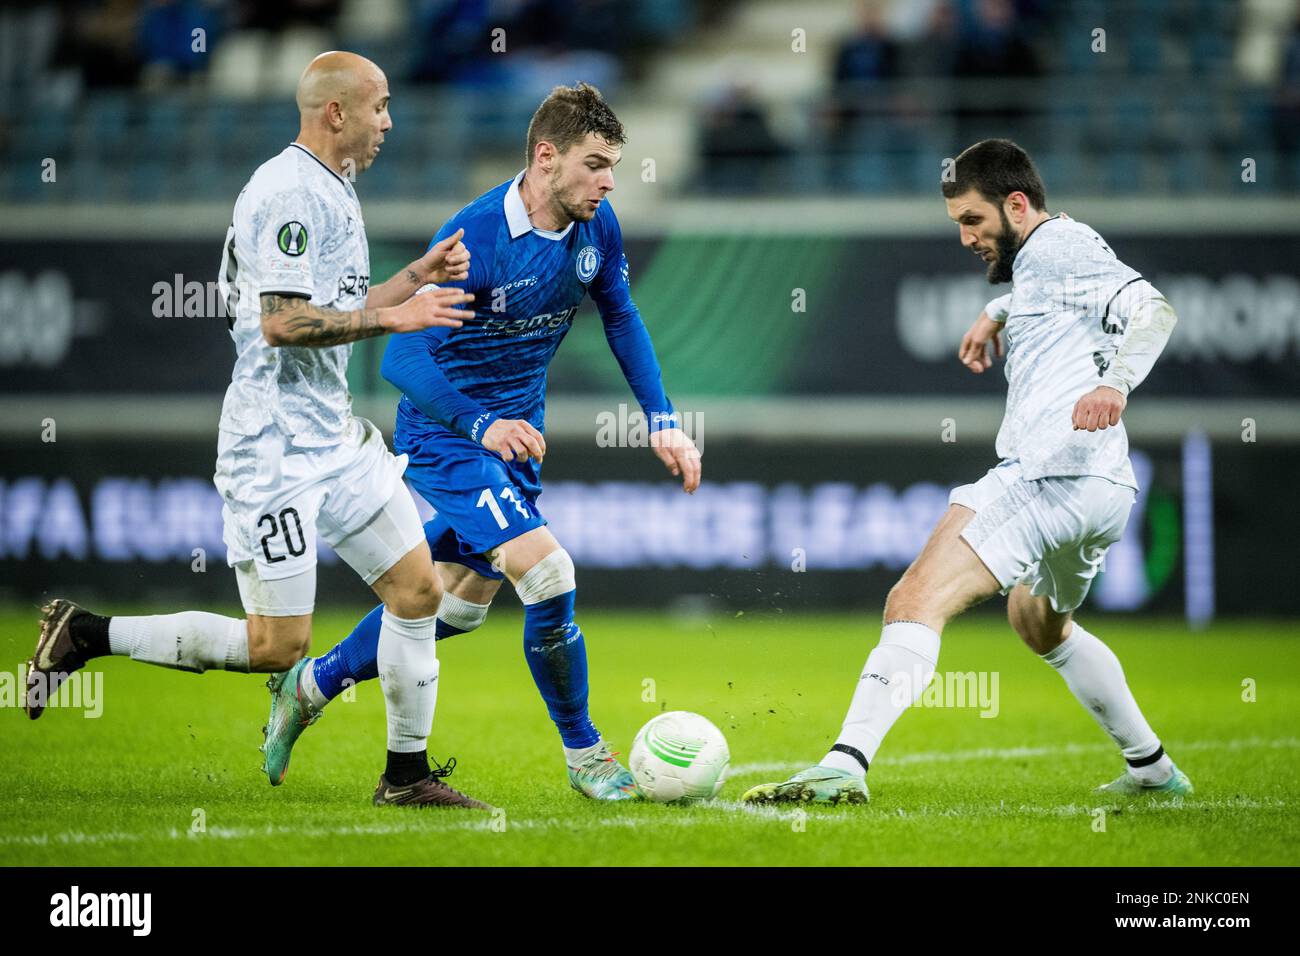 Gent, Belgium, 23/02/2023, Qarabag's Richard Almeida, Gent's Hugo Cuypers and Qarabag's Badavi Guseynov fight for the ball during a soccer game between Belgian KAA Gent and Azerbaijani Qarabag FK, Thursday 23 February 2023 in Gent, the return leg of the play-off round of the UEFA Europa Conference League competition. Qarabag won the first leg with a 1-0 score. BELGA PHOTO JASPER JACOBS Stock Photo